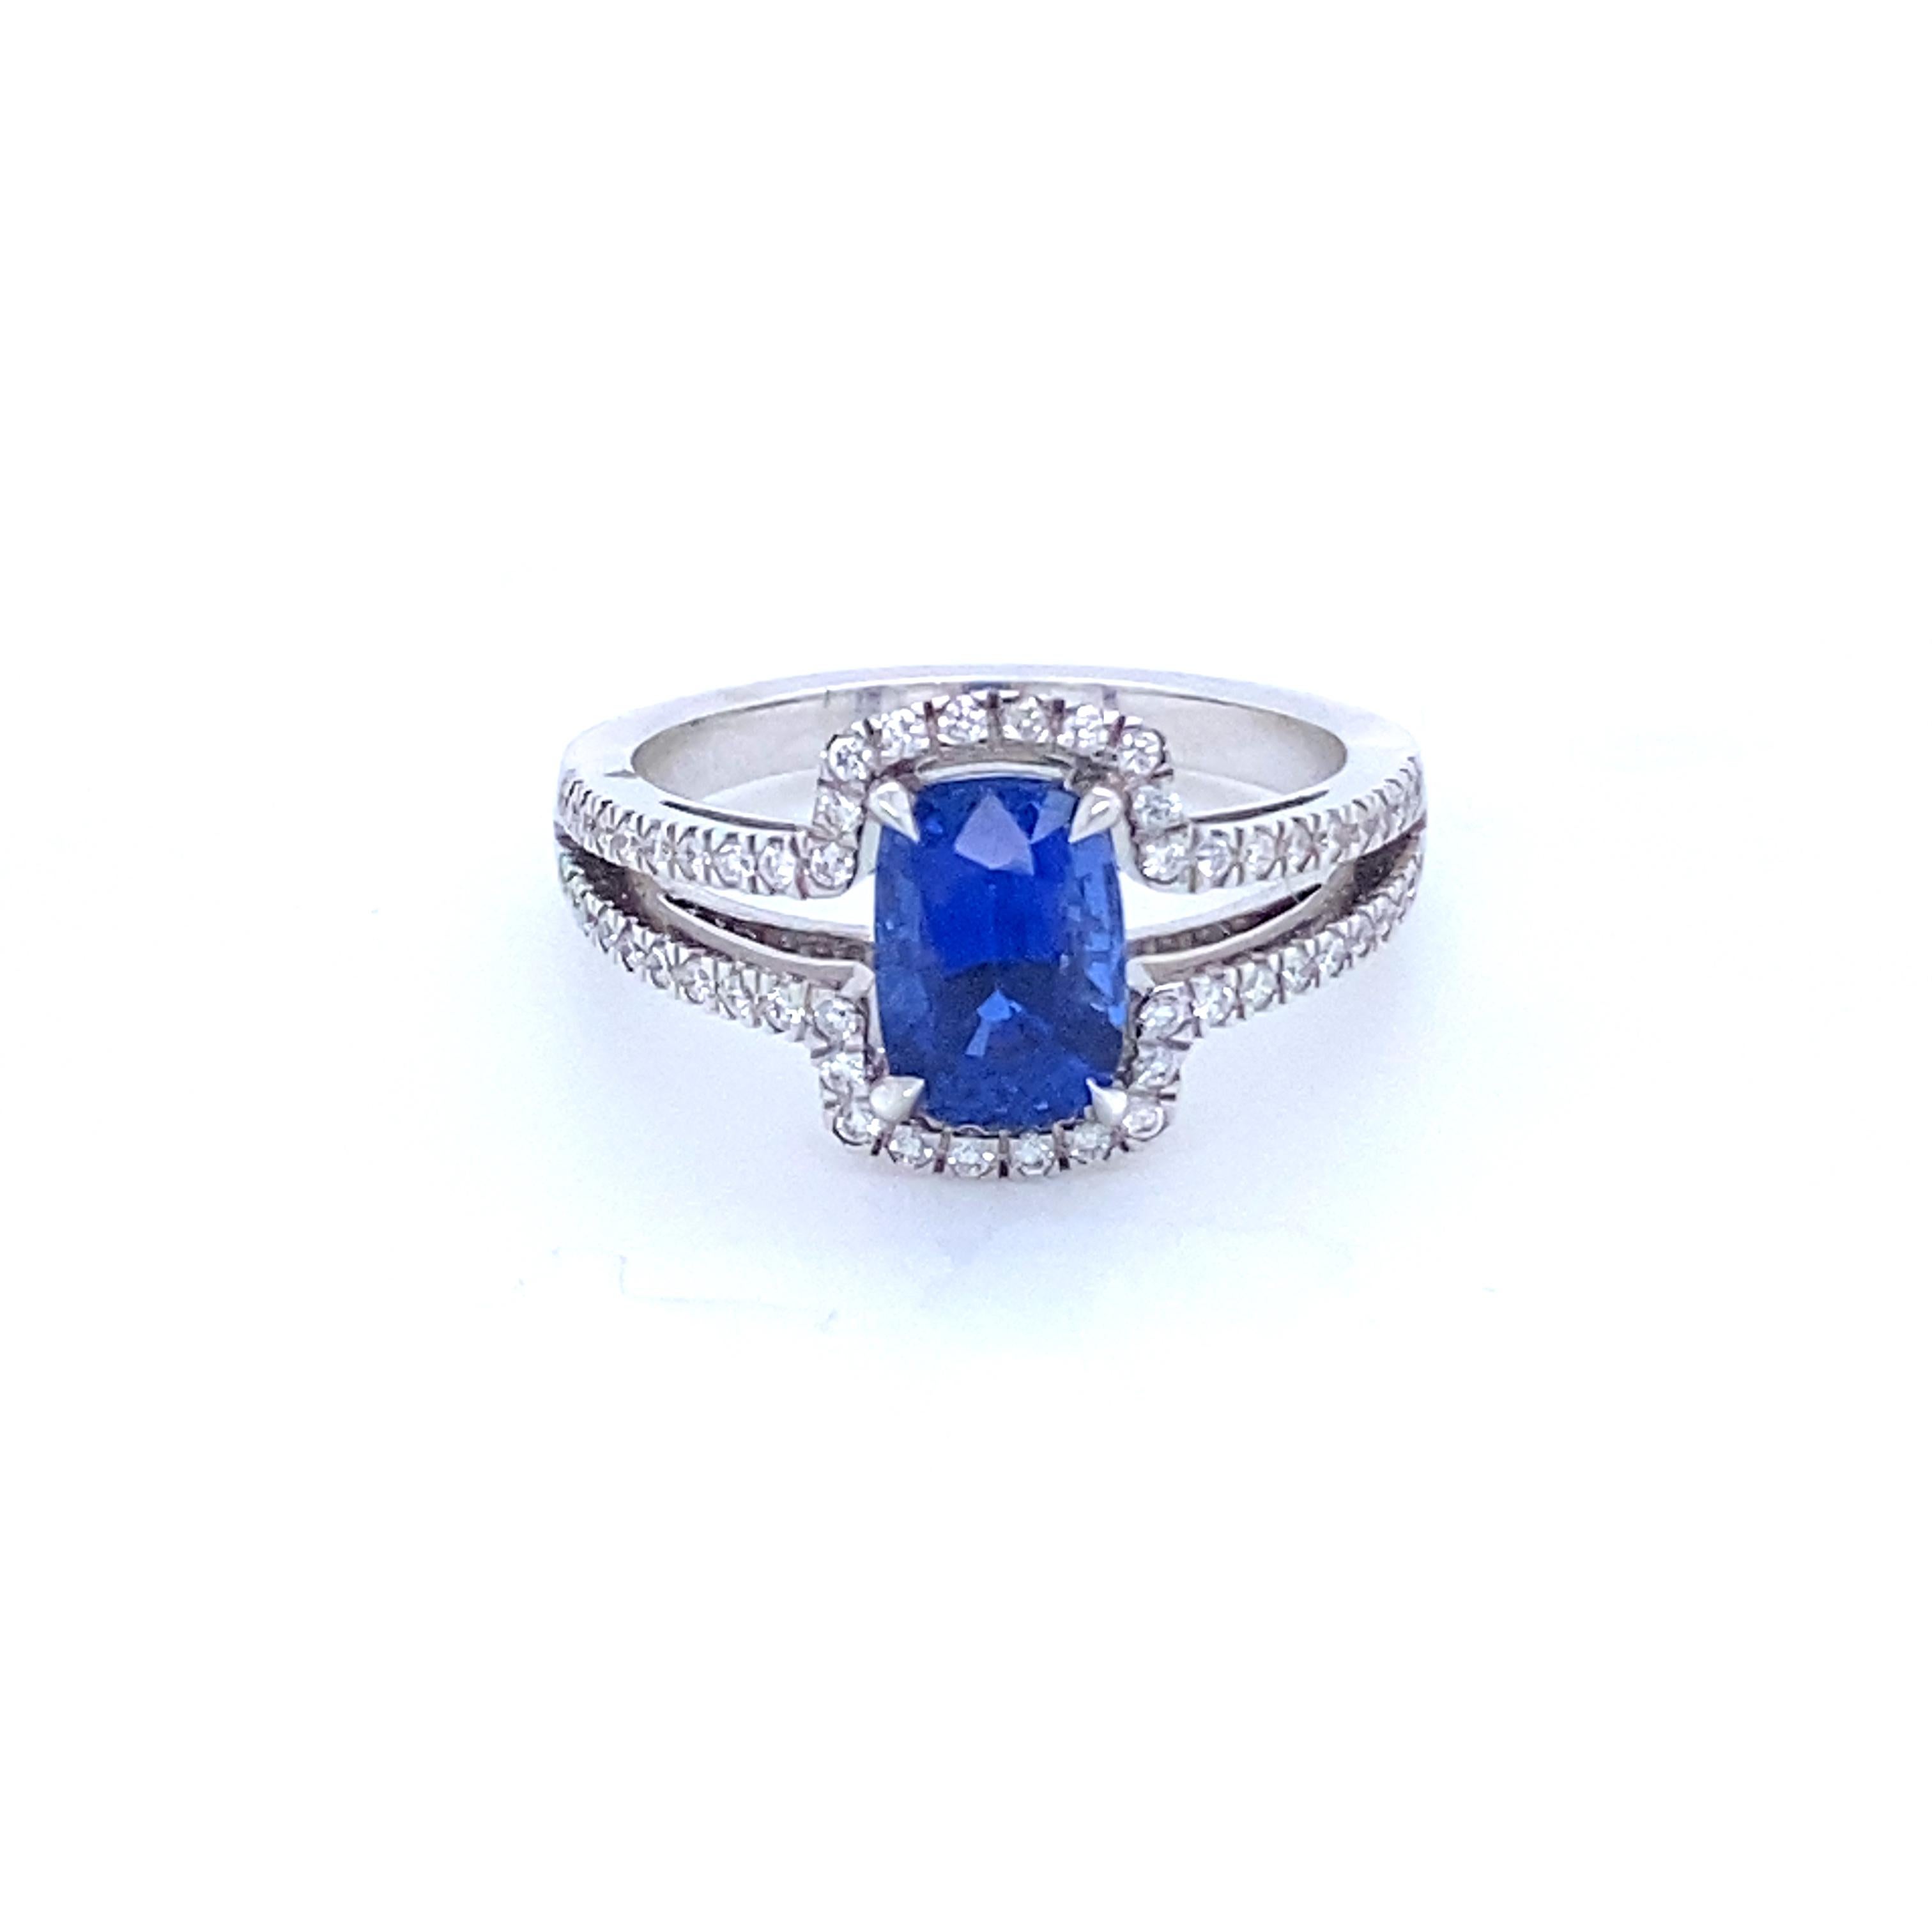 White Gold Engagement Ring with Ceylon Sapphire and 56 diamonds
French Collection by Mesure et Art du Temps.

Engagement ring in 18 carat white gold. The ring is surmounted by a Cushion-shaped Ceylon sapphire which weighs 1.76 Carat, this ring is